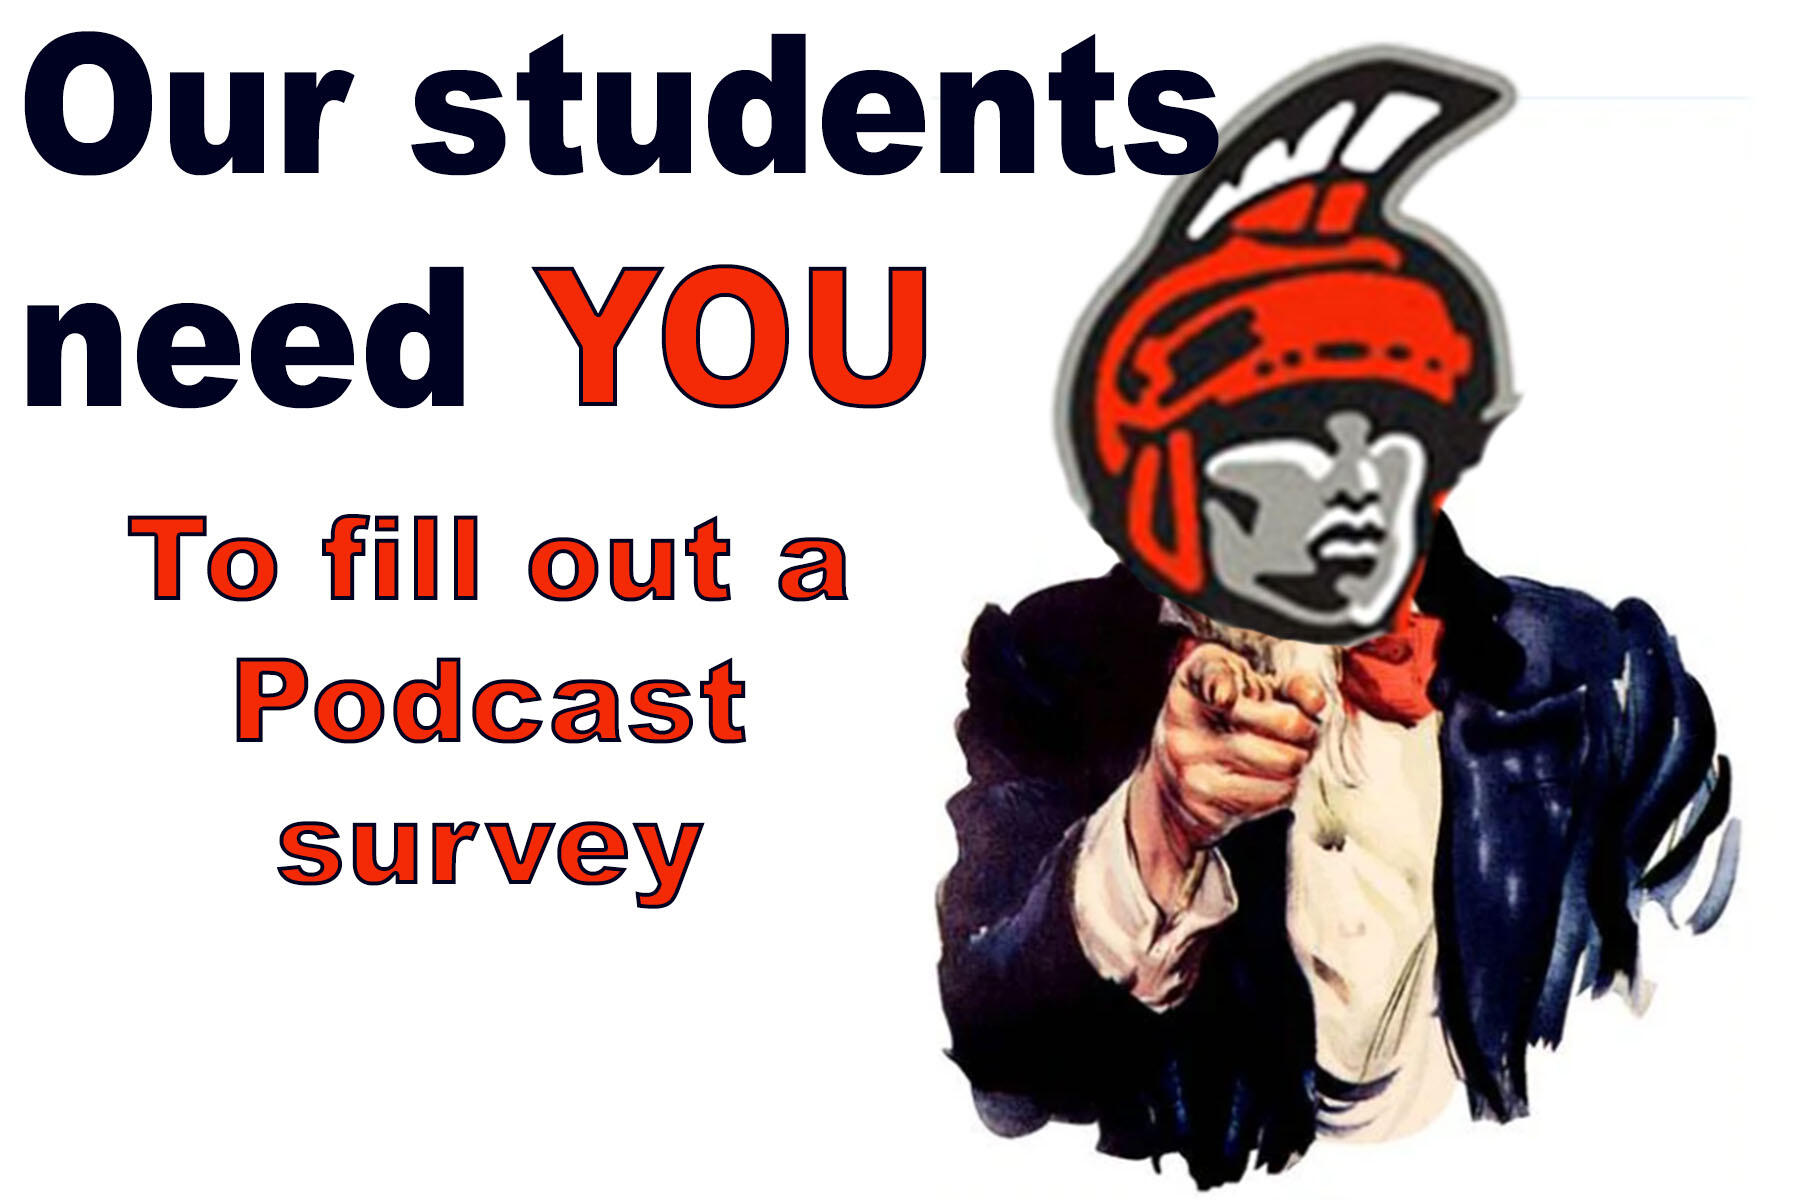 Our students need help with their podcasts!